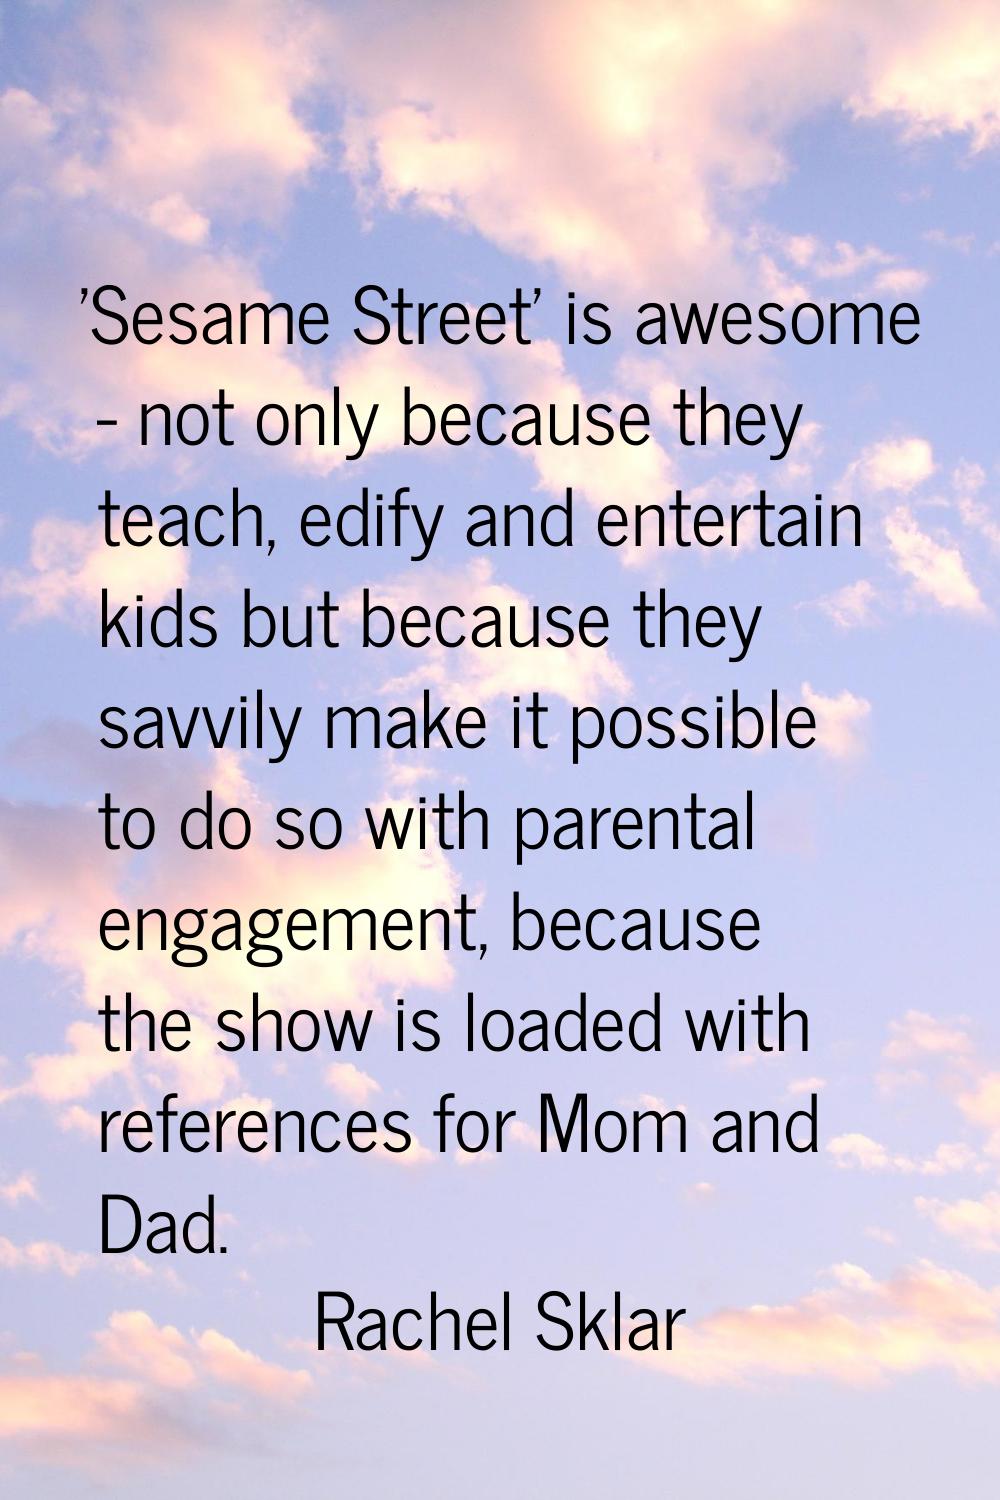 'Sesame Street' is awesome - not only because they teach, edify and entertain kids but because they